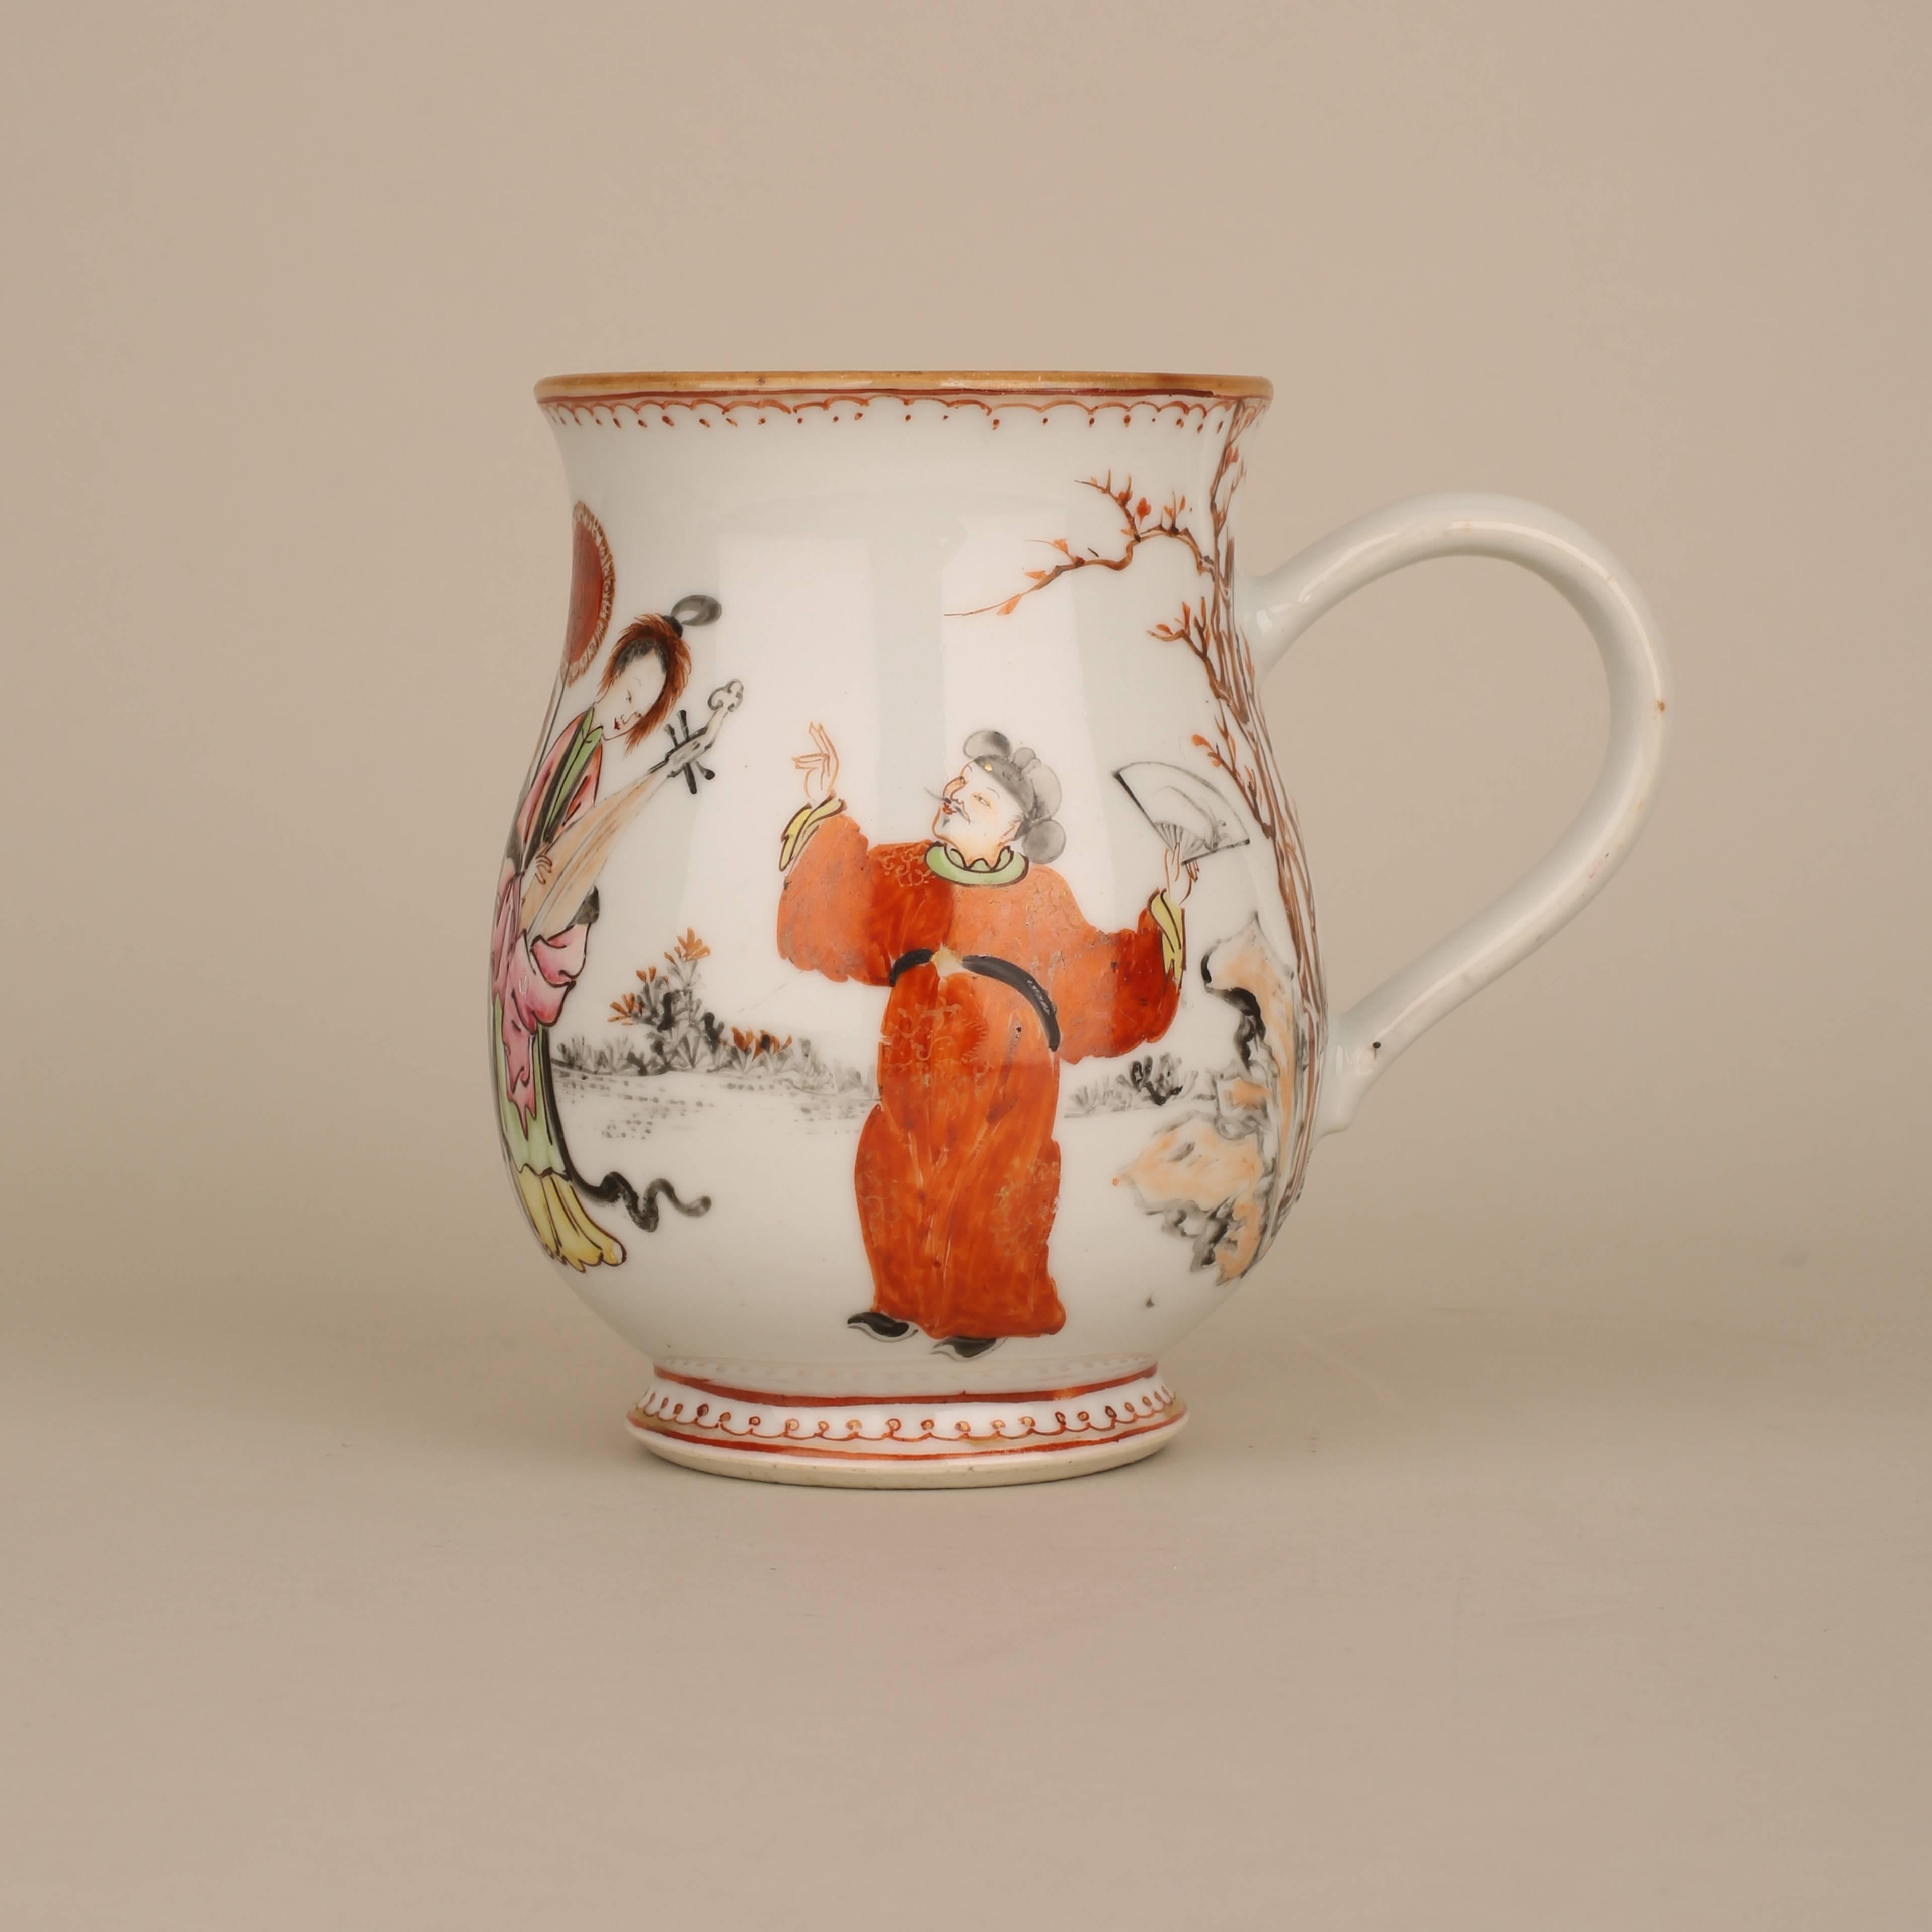 A Chinese porcelain large beaker cup painted in enamels with a man holding a fan and four attendants, one leading a horse all in a continuous scene, a decorative pattern to the lip and foot rim.

14.3cm high.

Qianlong, 1736-1795.